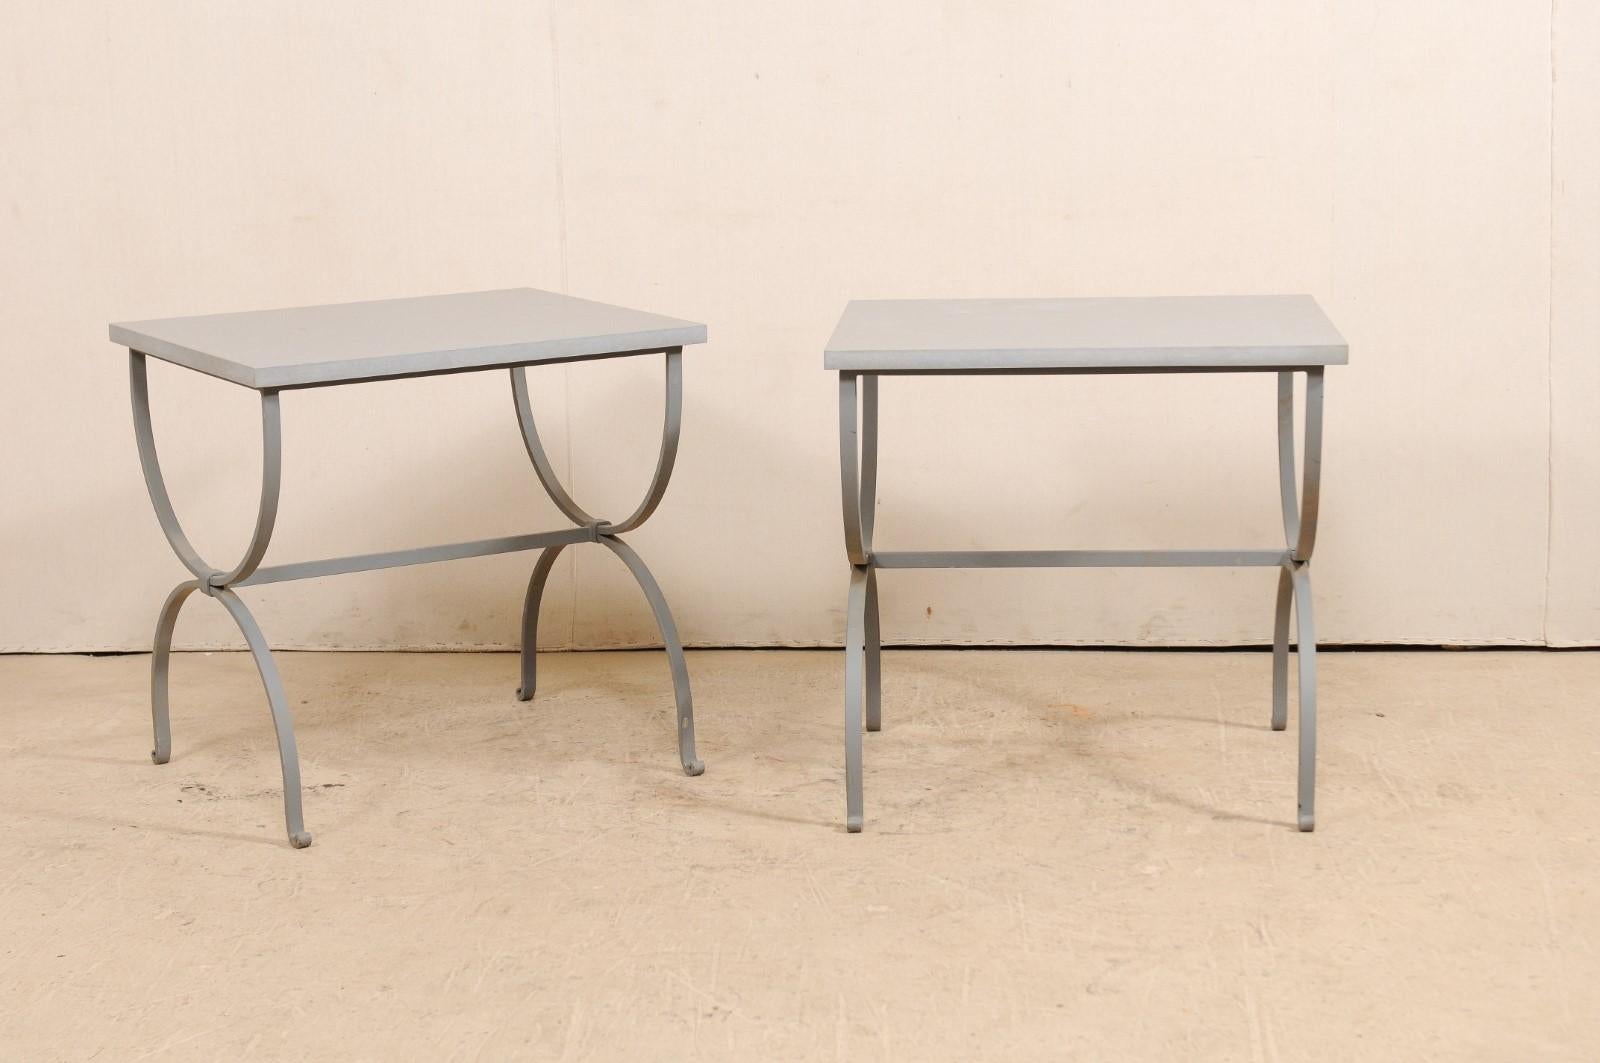 A pair of American custom iron occasional tables with stone tops. This pair of custom side tables each feature a rectangular-shaped, honed quartzite top, supported by a painted iron savanrola, or curule style base. The honed stone top is a light